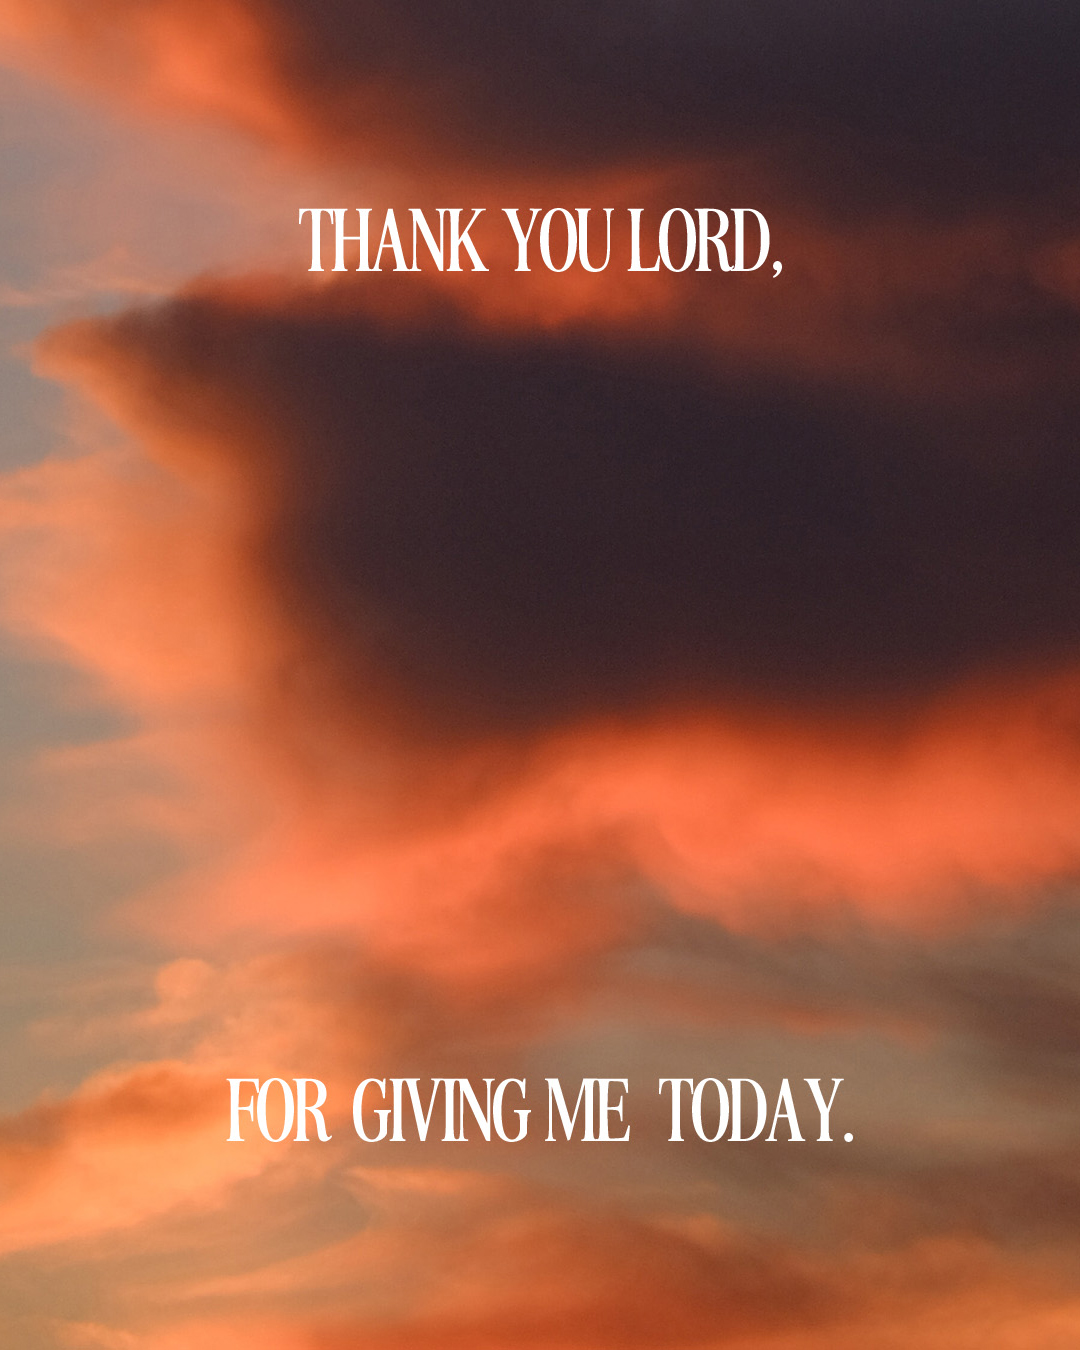 Thank you Lord, for giving me today.